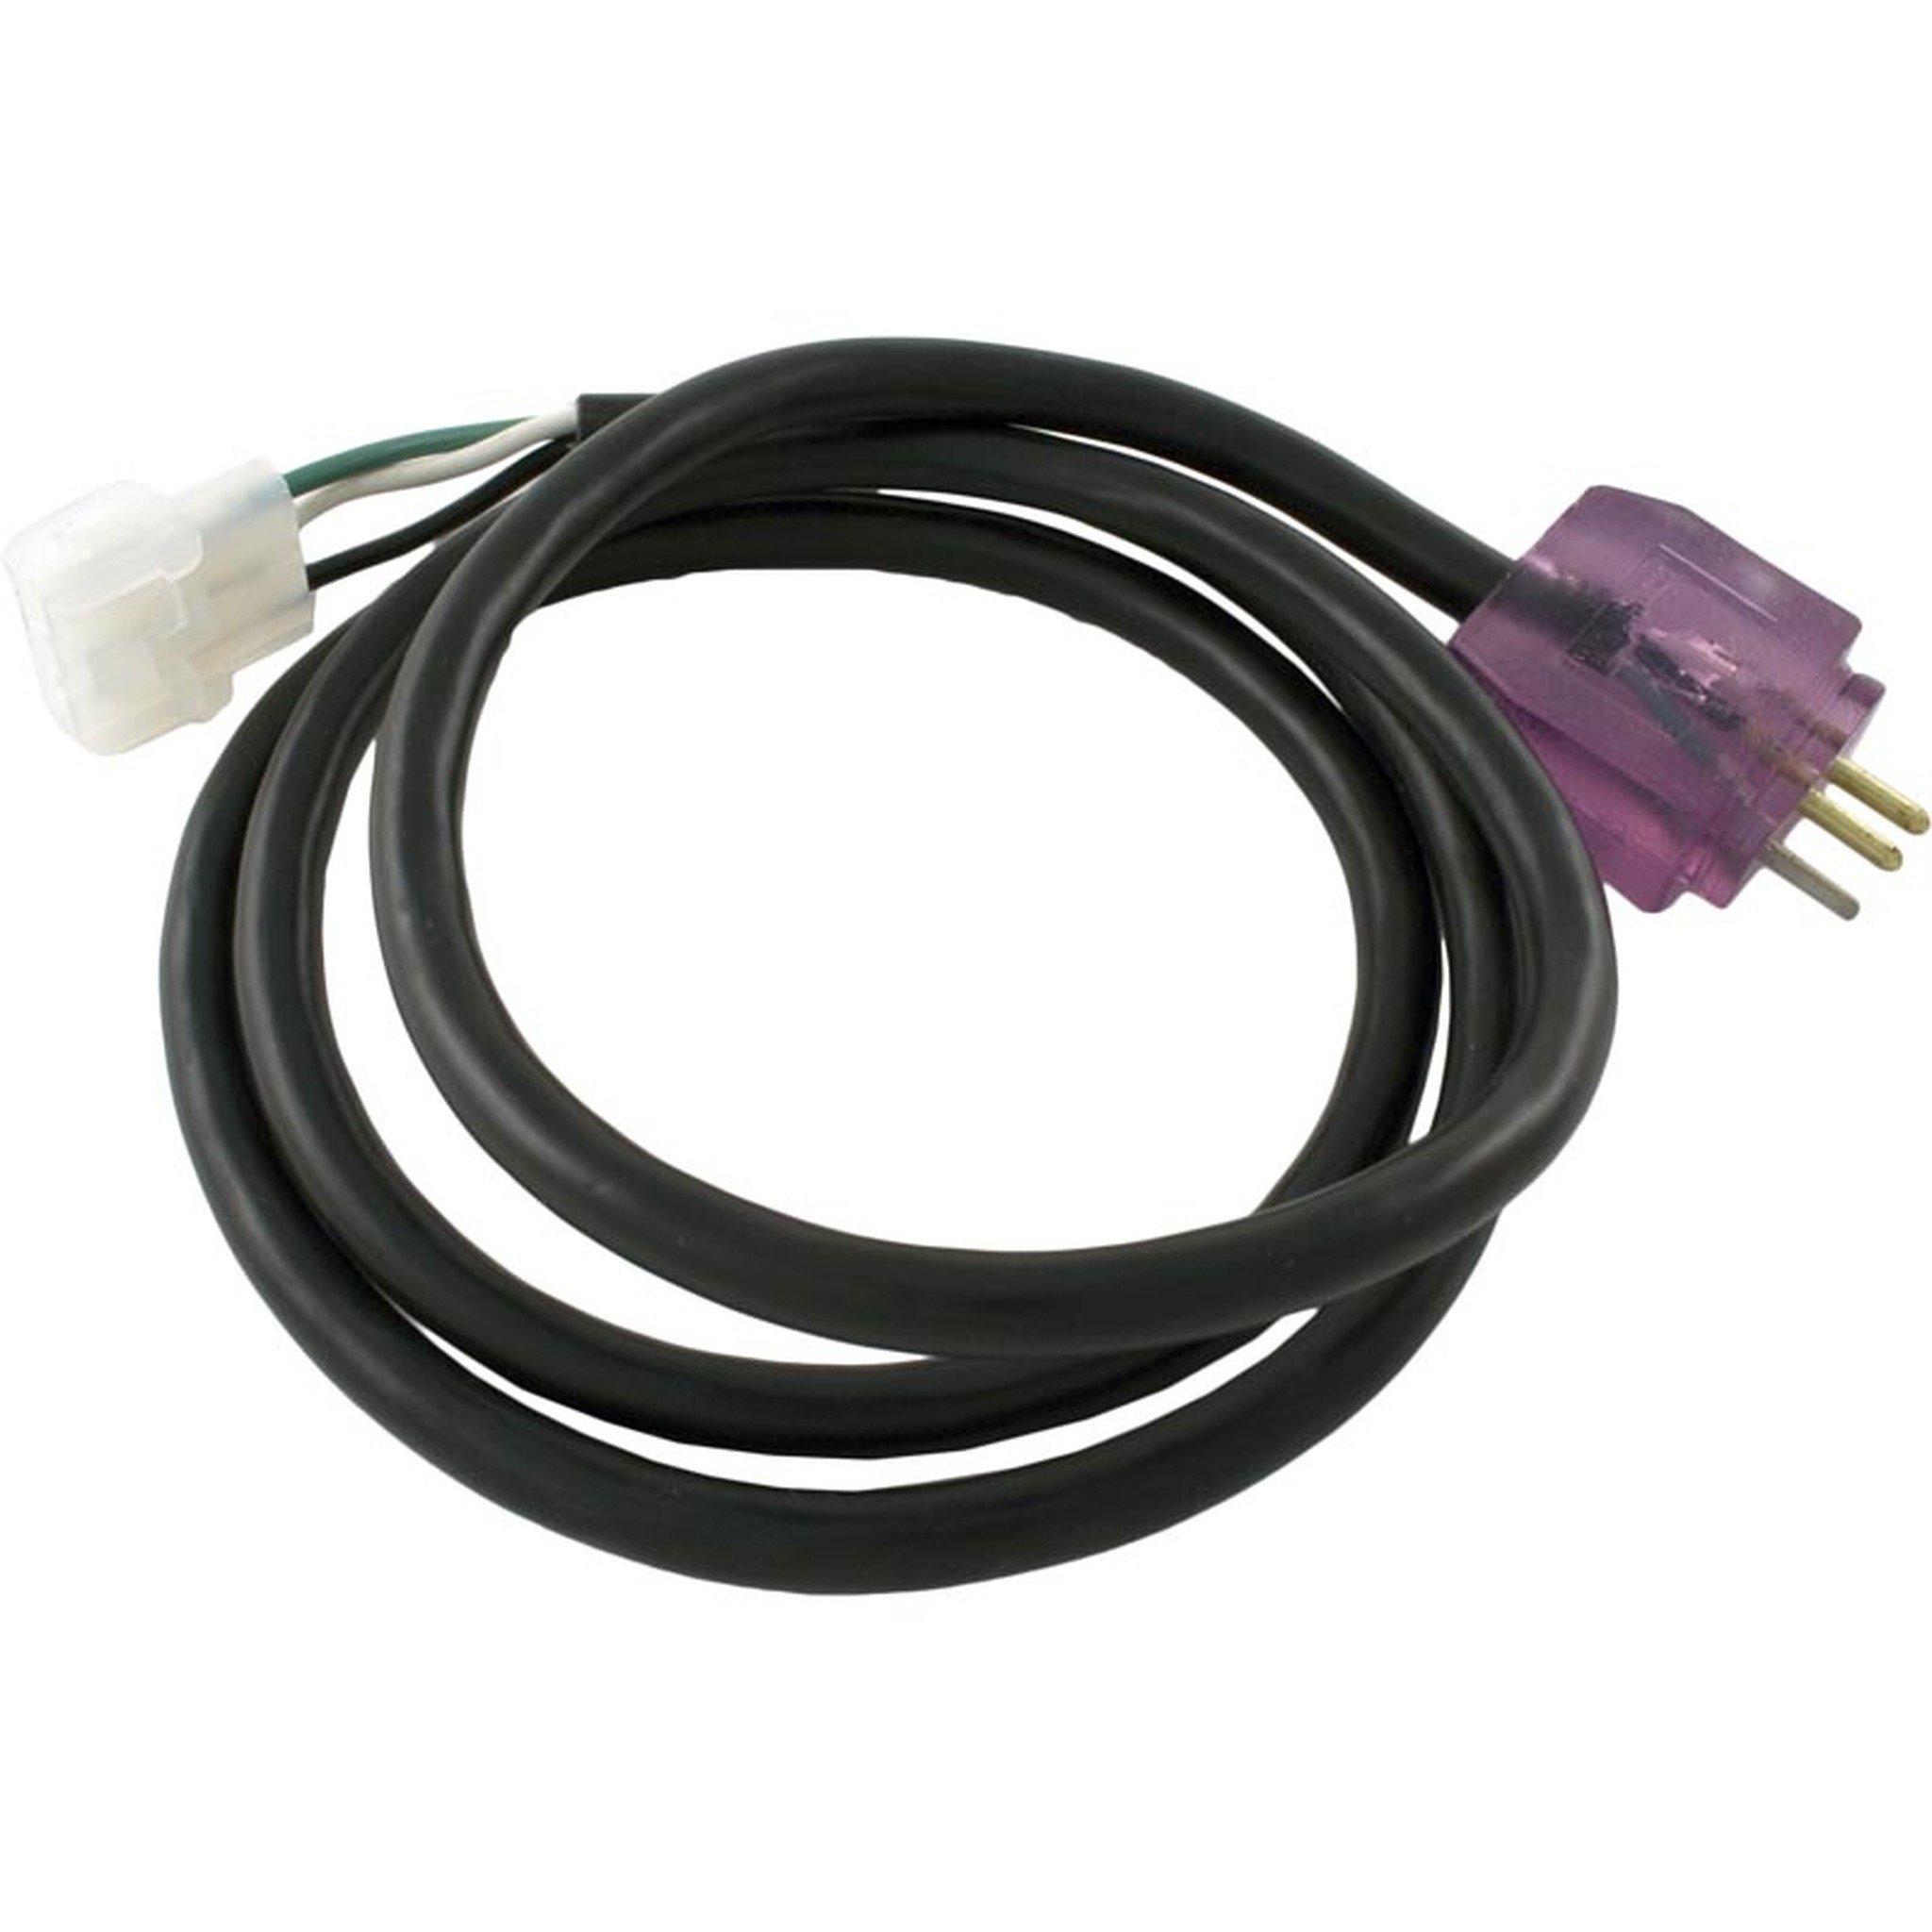 Allied Innovations Spa Blower Power Cord 3 wire 48in with JJ Male P 3 Plug